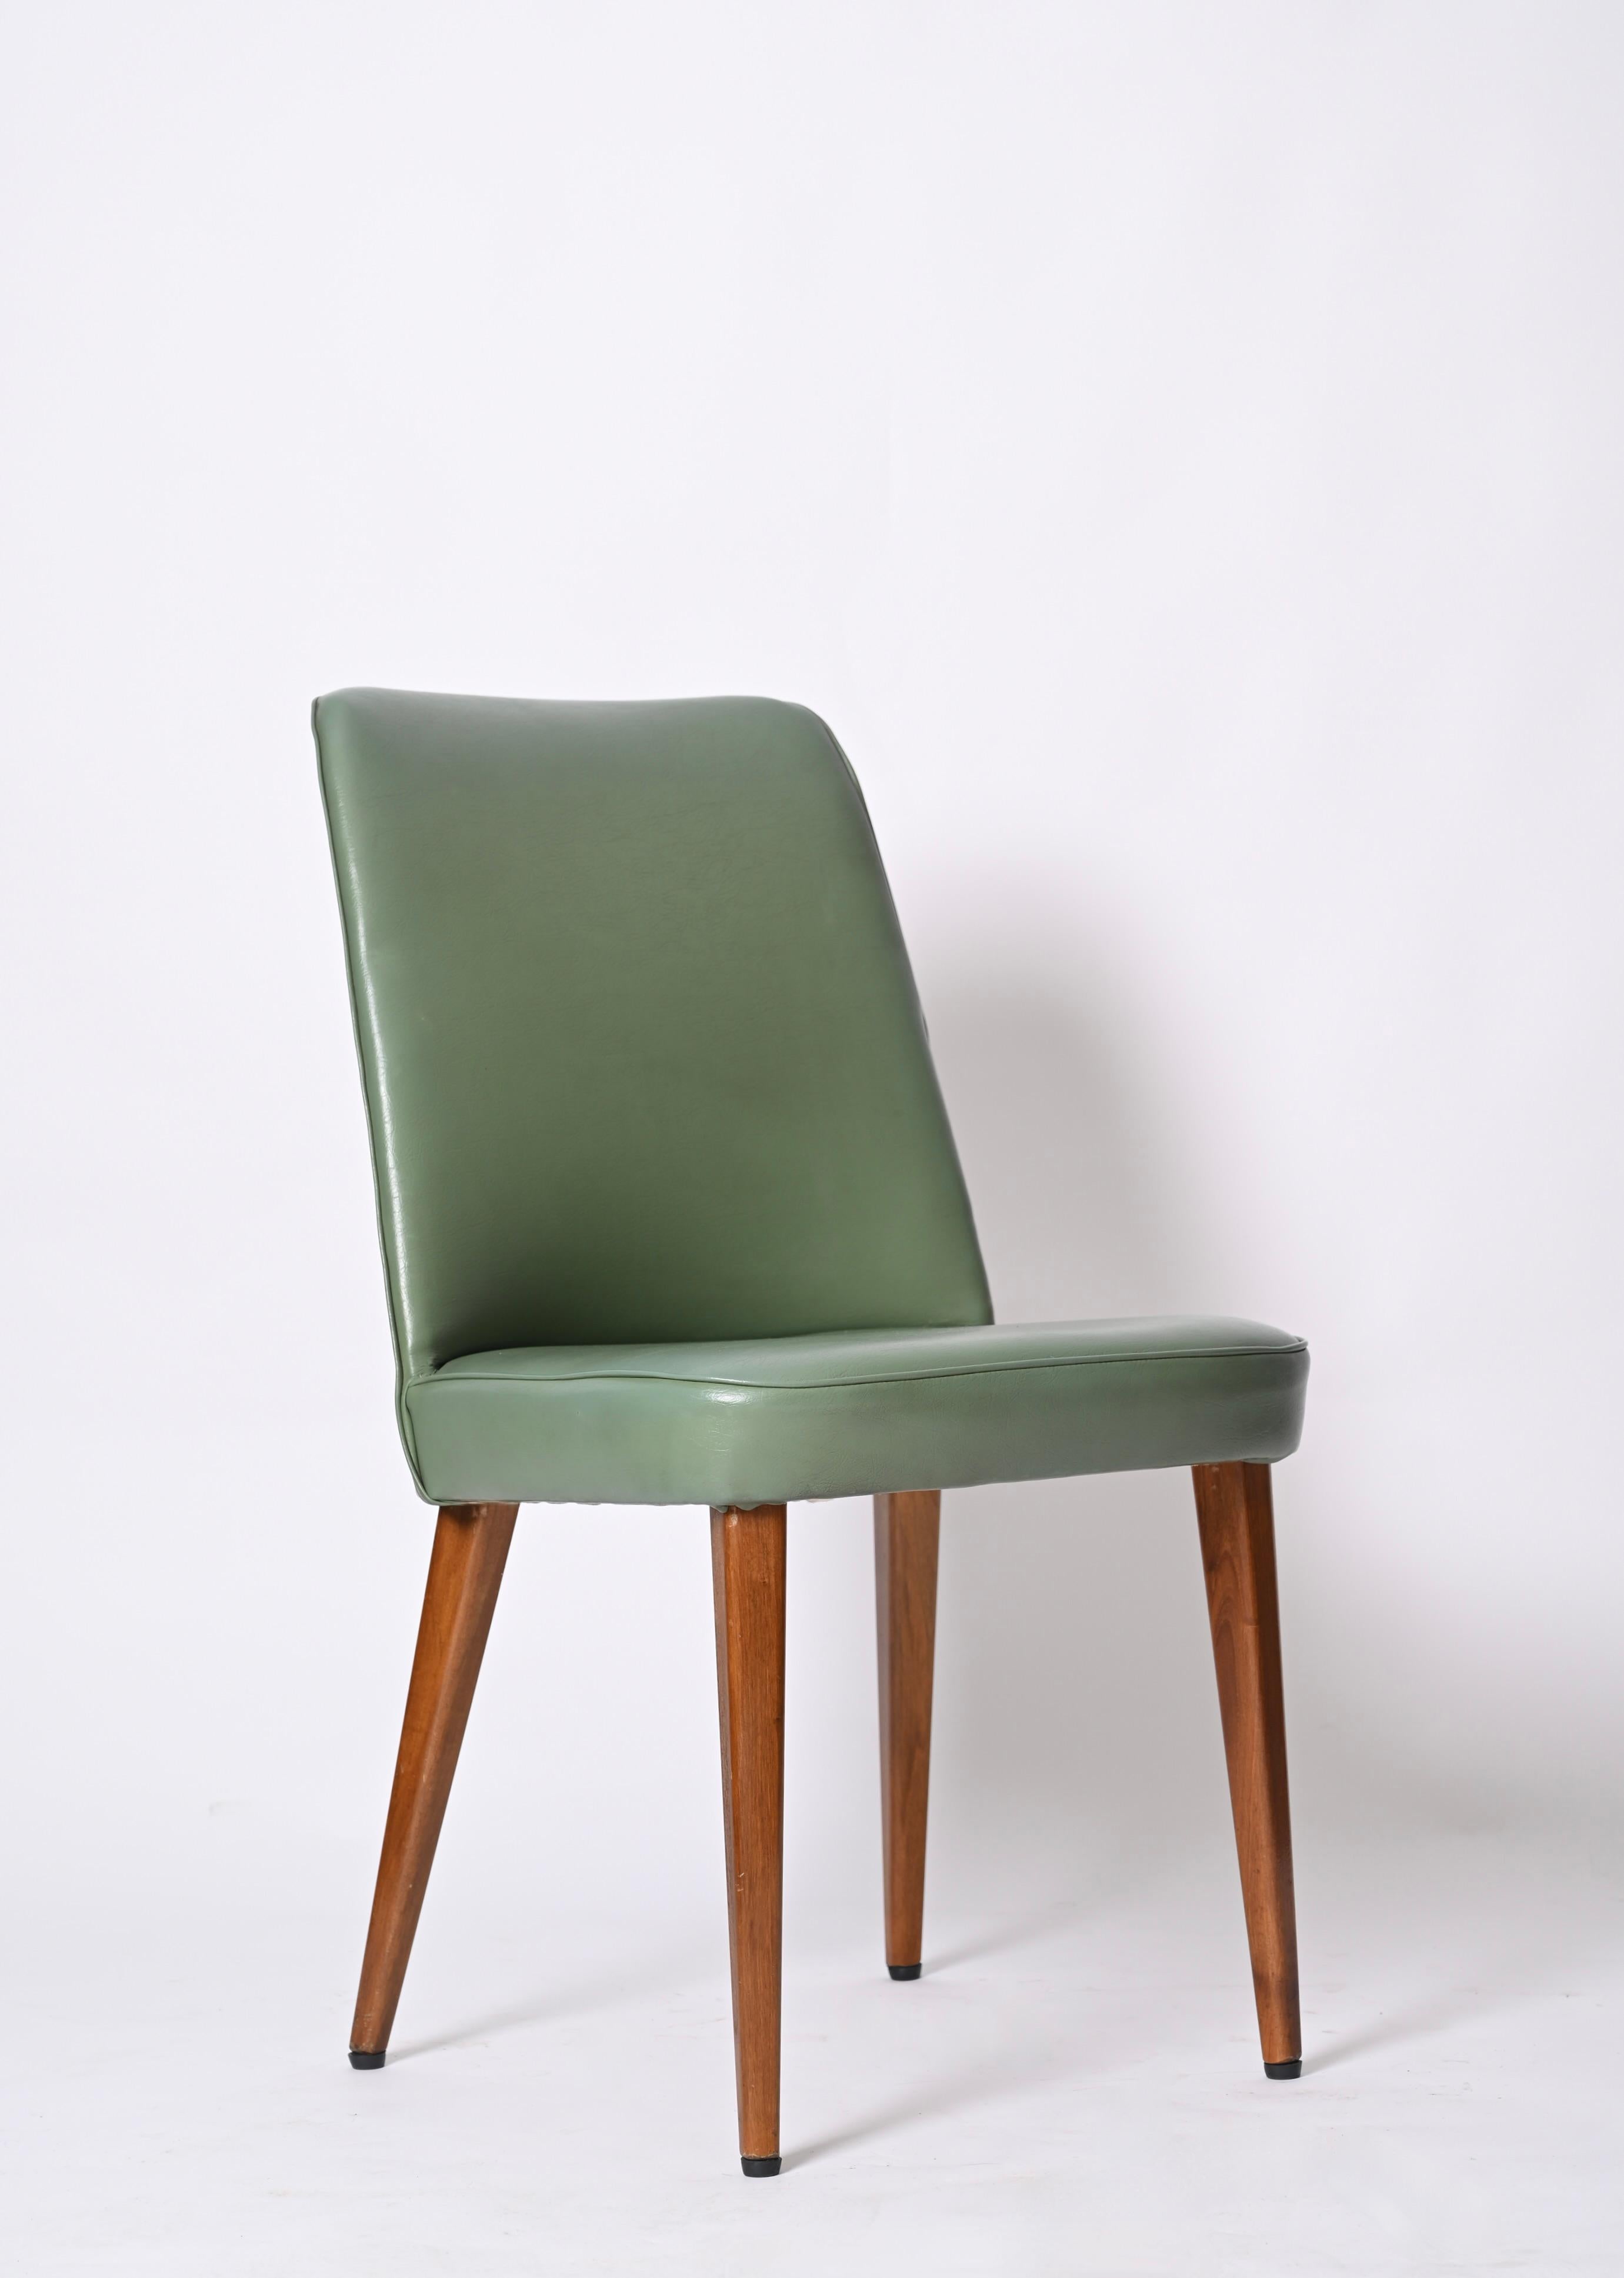 Mid-Century Modern Green Leather Chair by Anonima Castelli, Italy, 1950s  For Sale